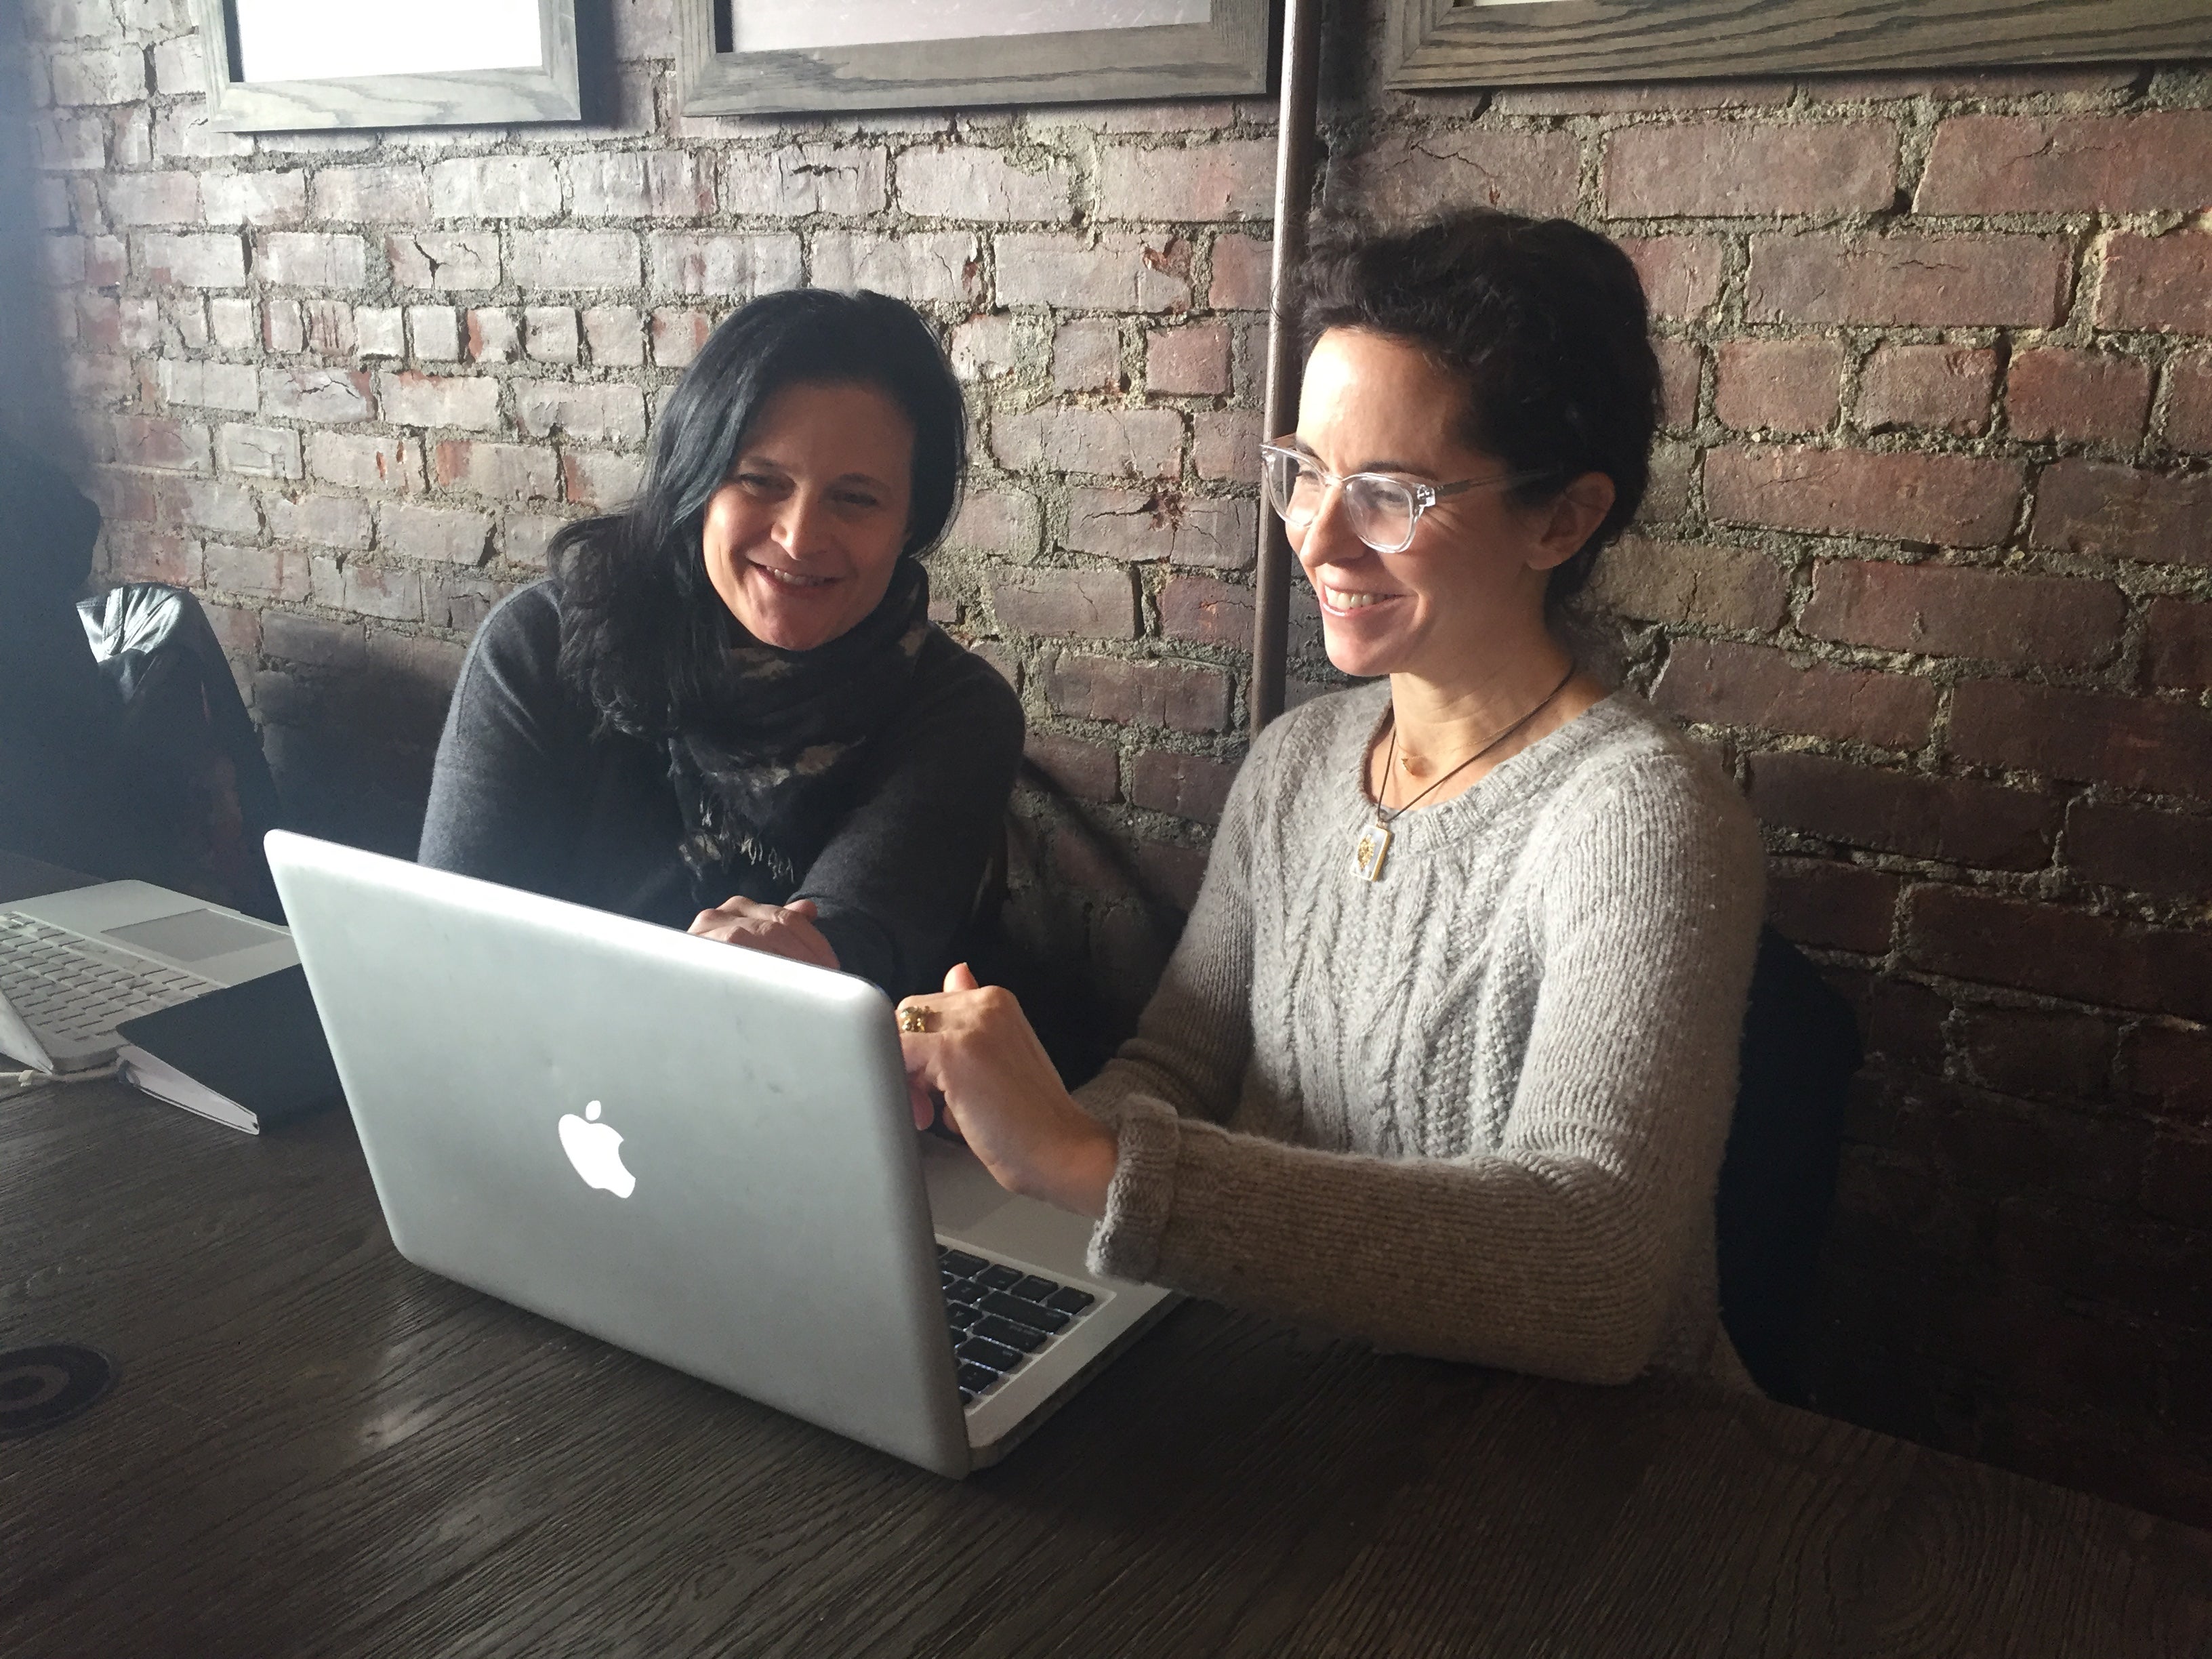 Two Women Smiling and working on laptops in front of brick wall in coffee shop